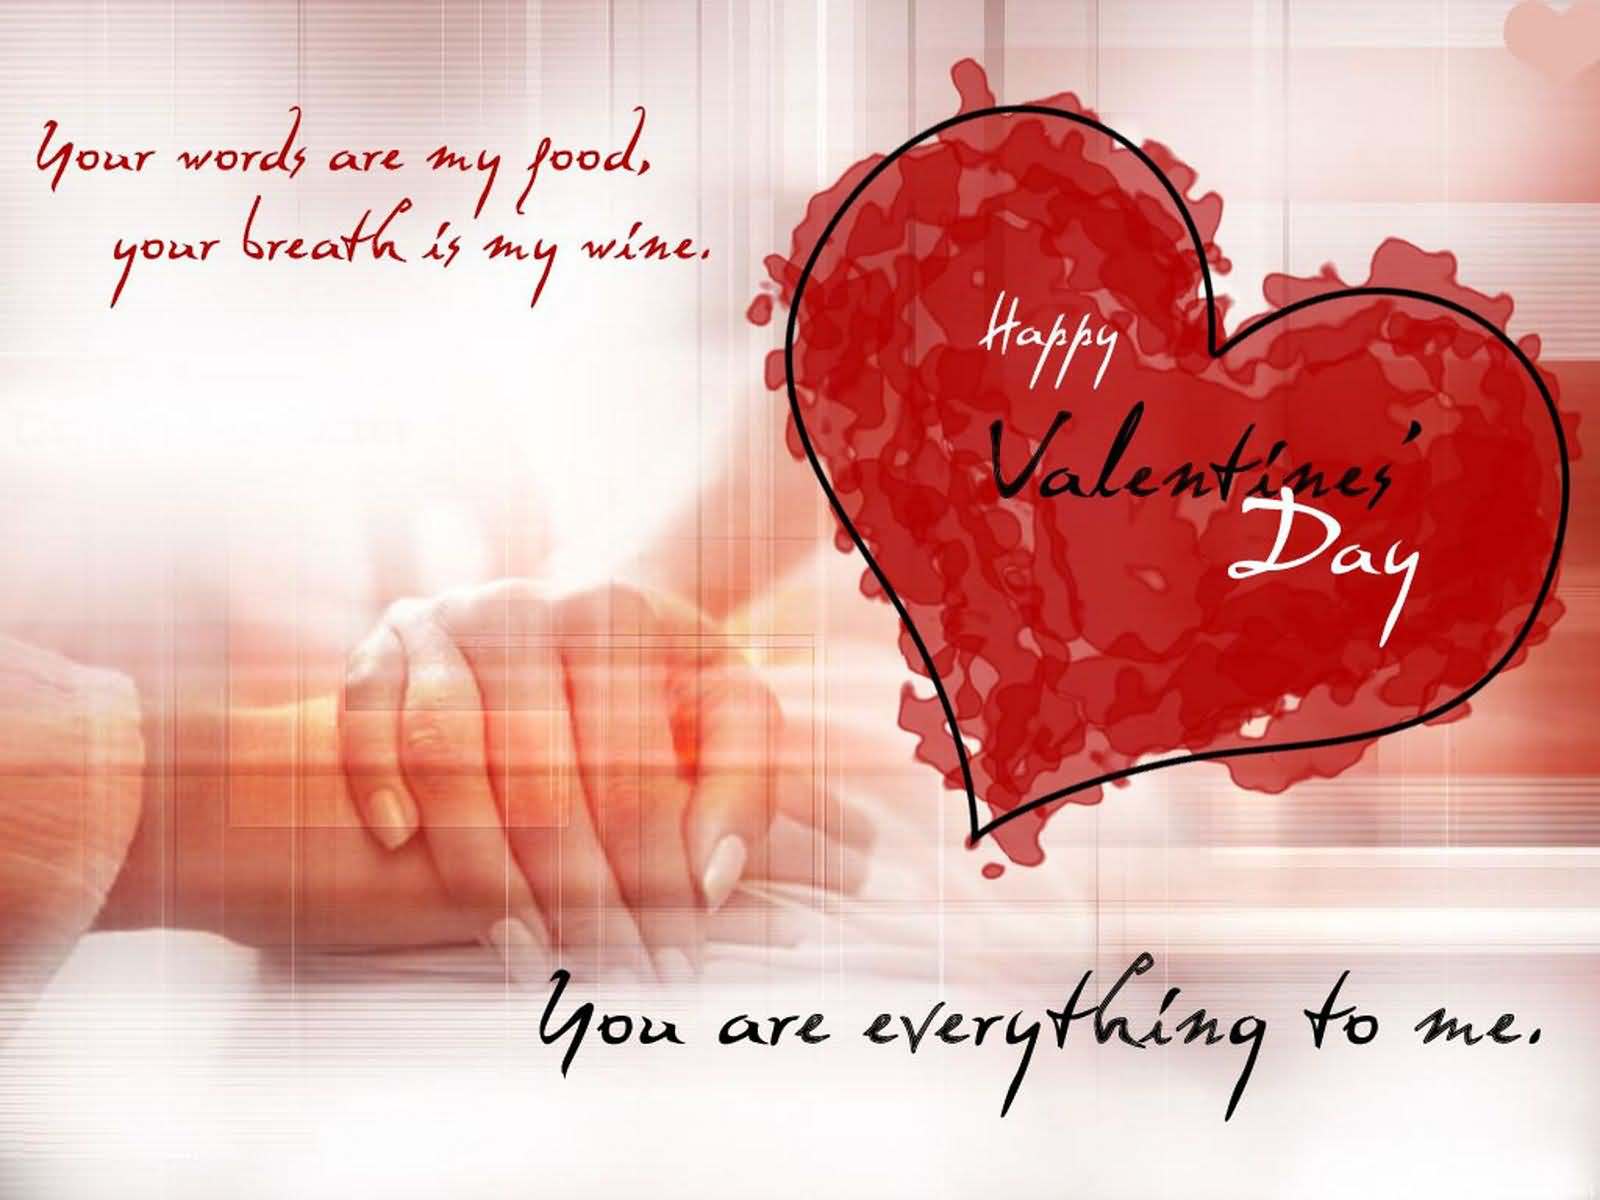 Happy Valentines Day holding hands background picture